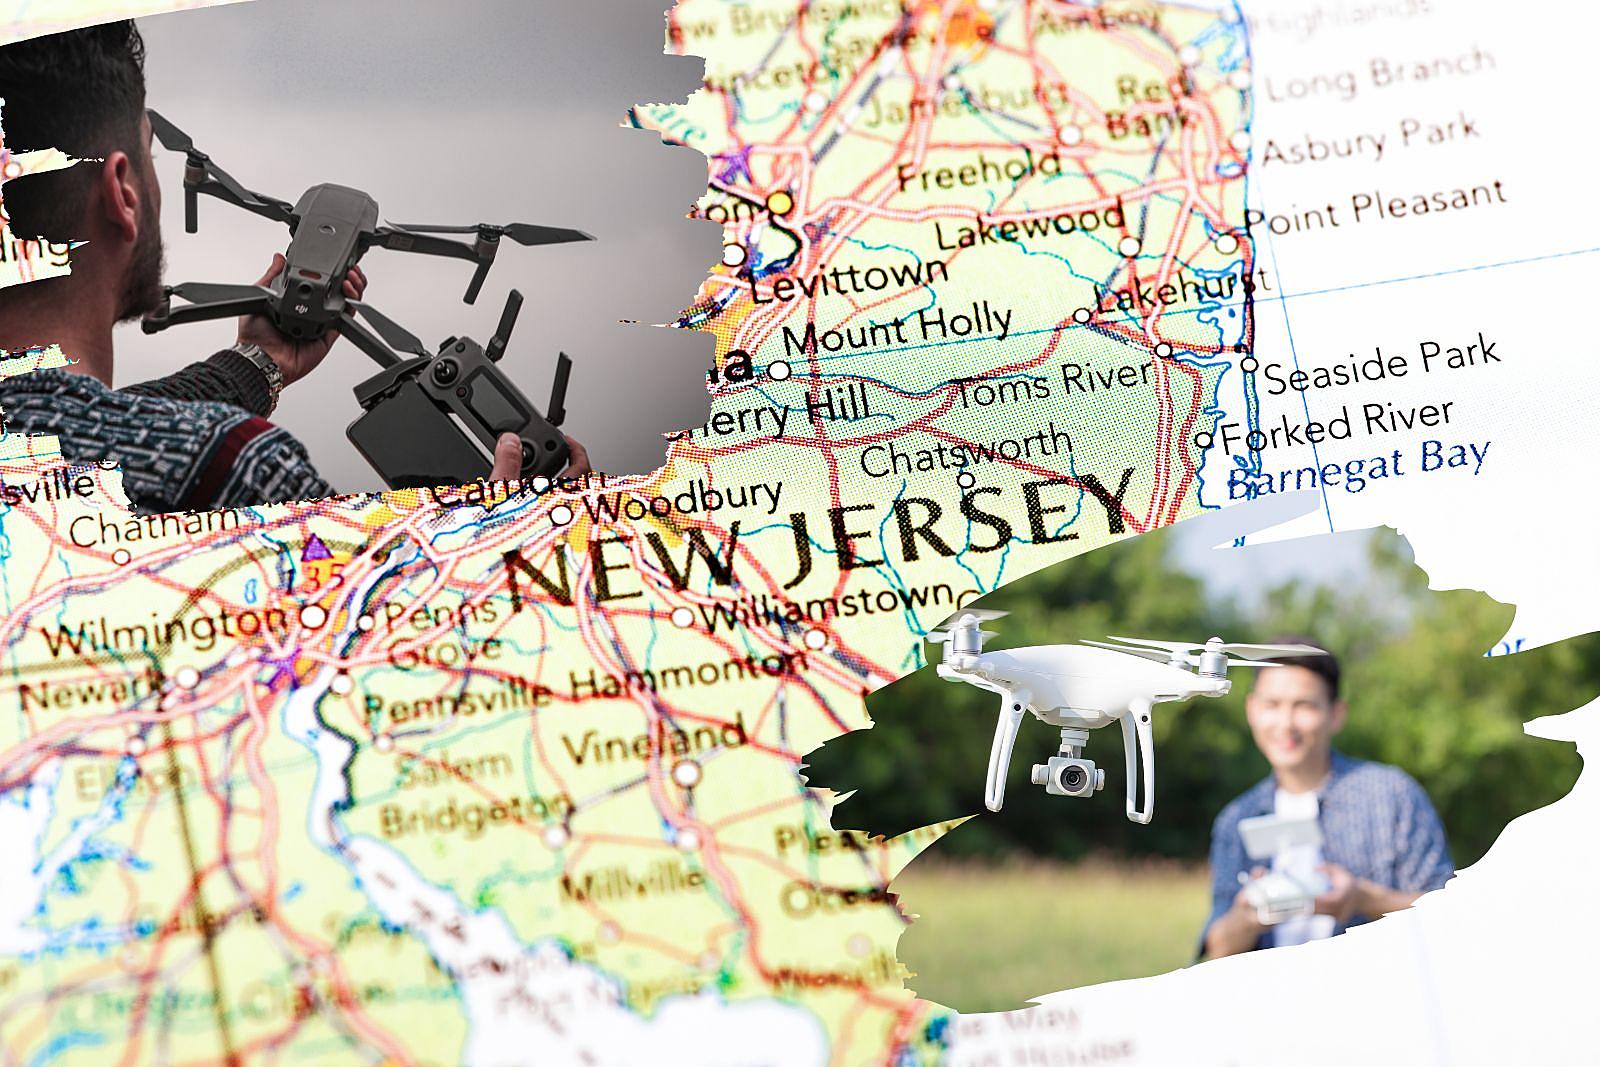 Where Can I Fly My Drone In New Jersey